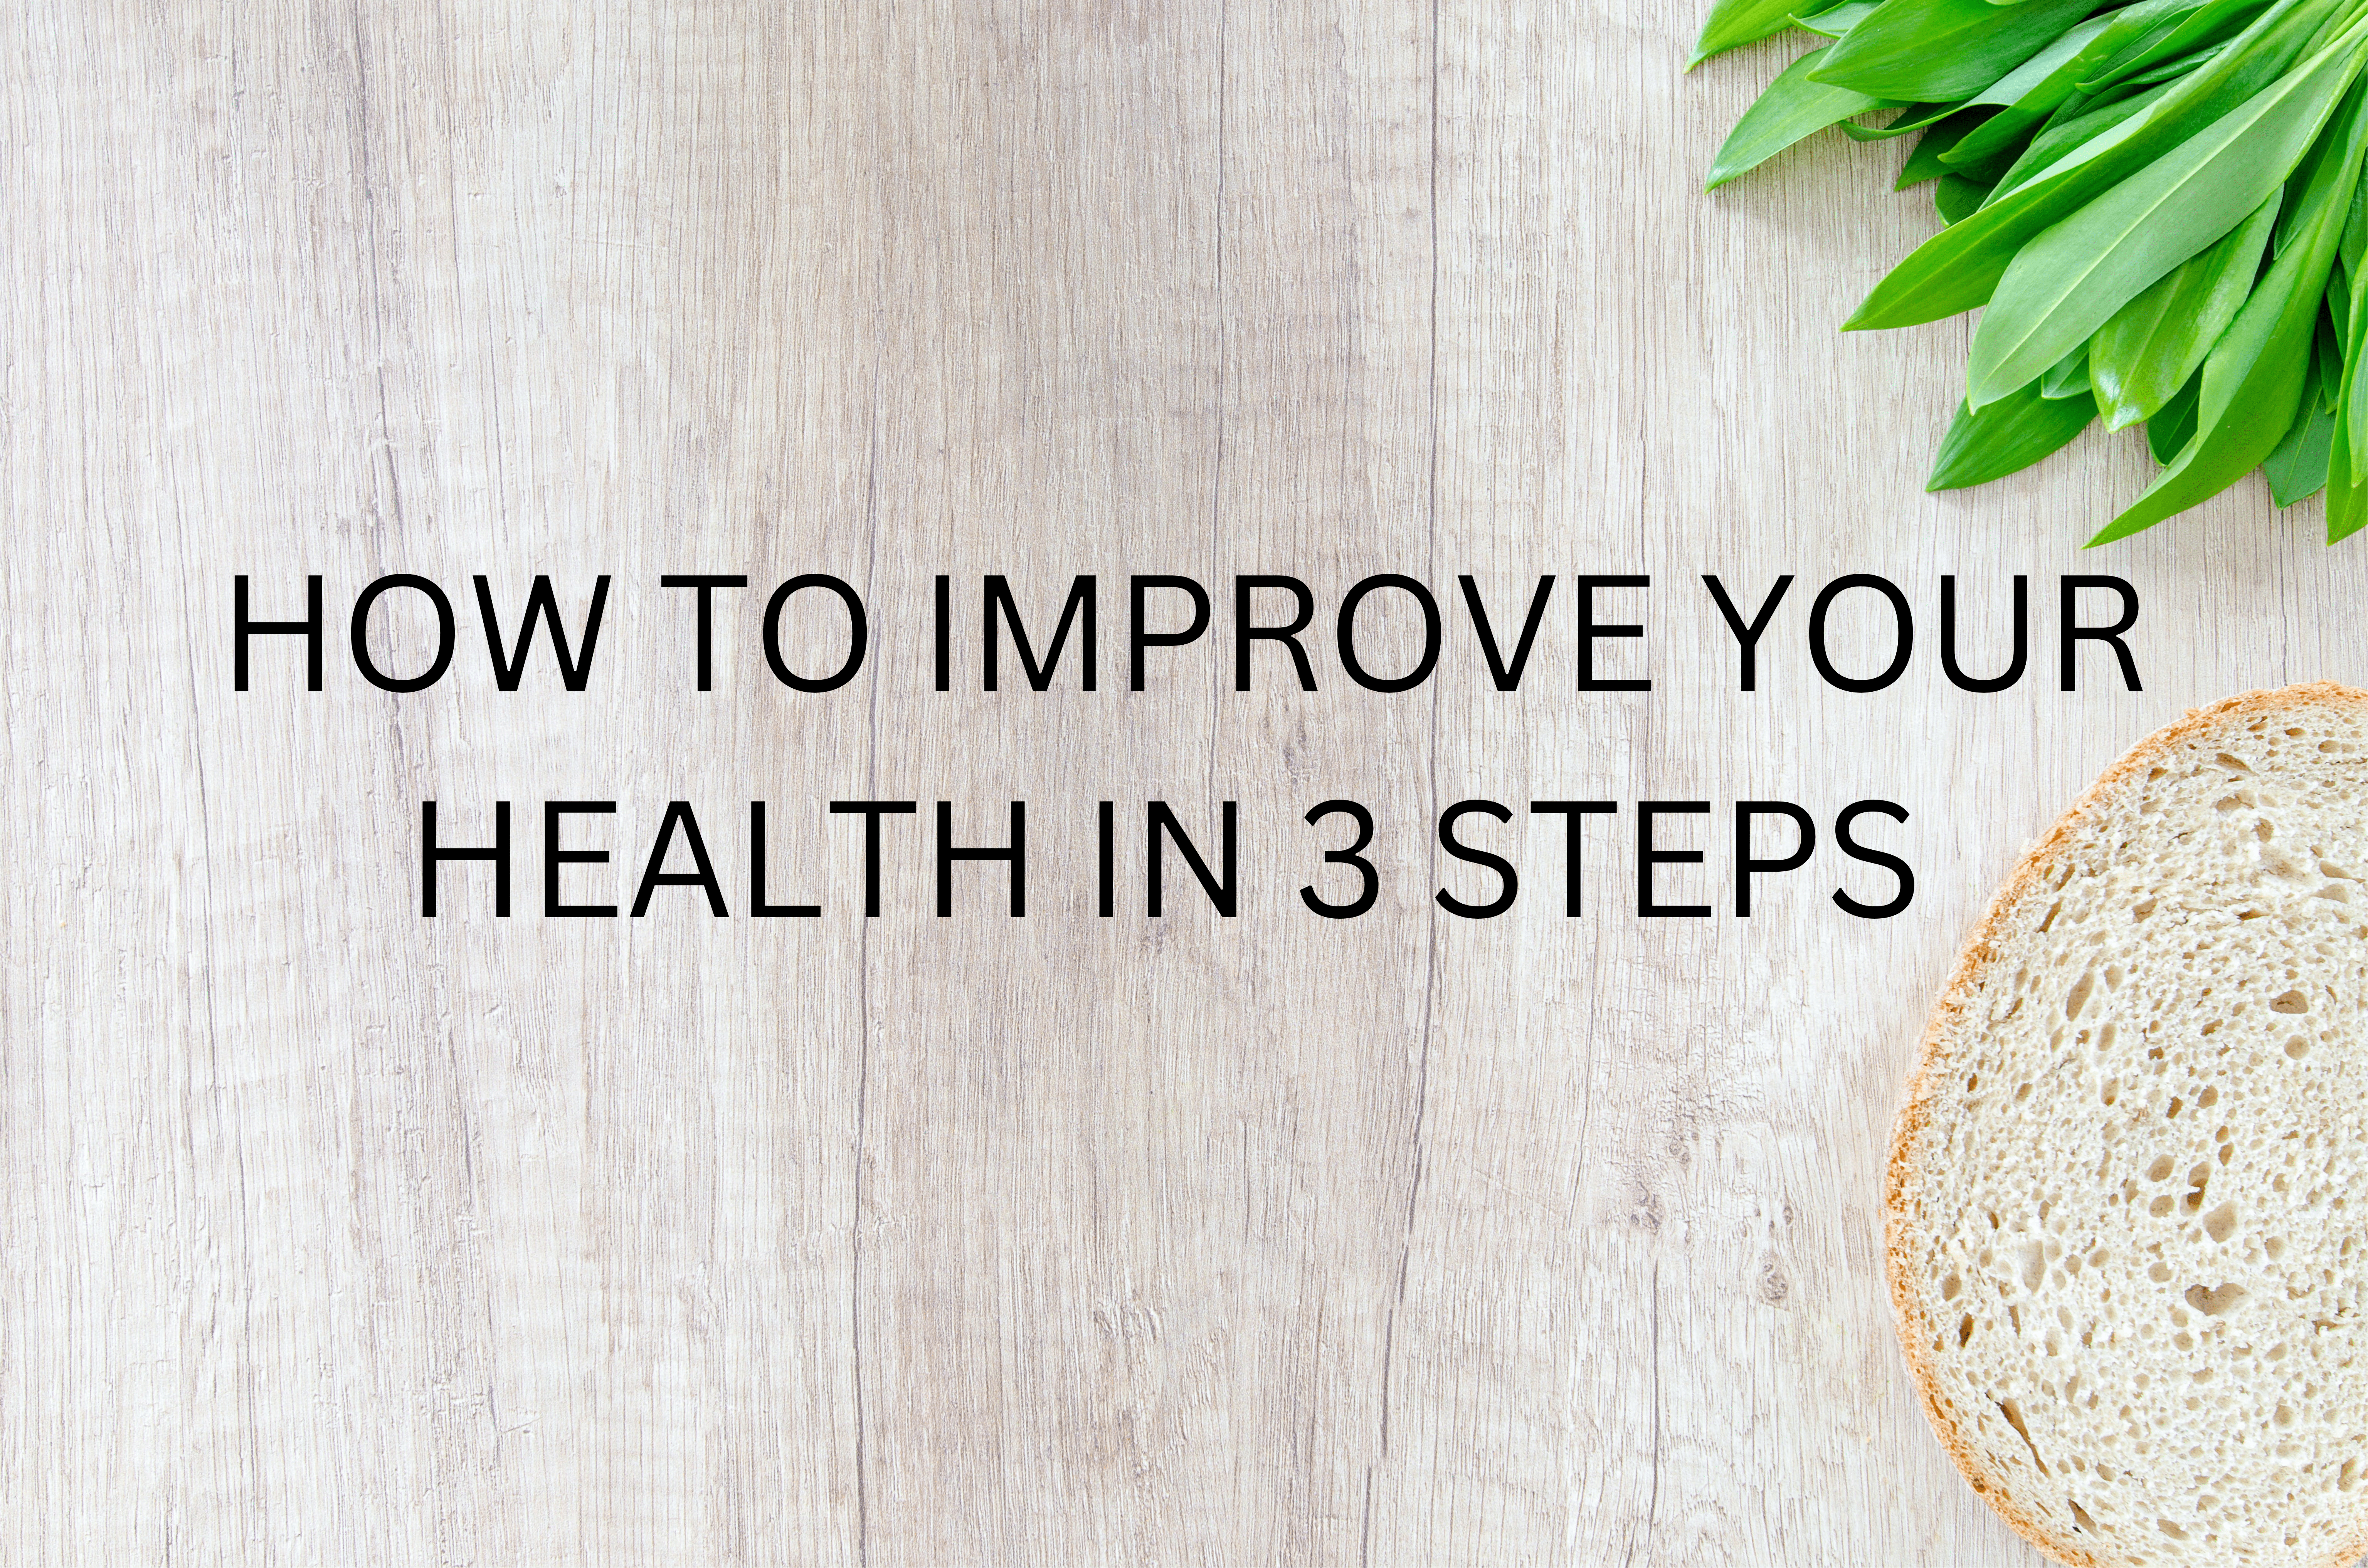 How to improve your health in 3 steps